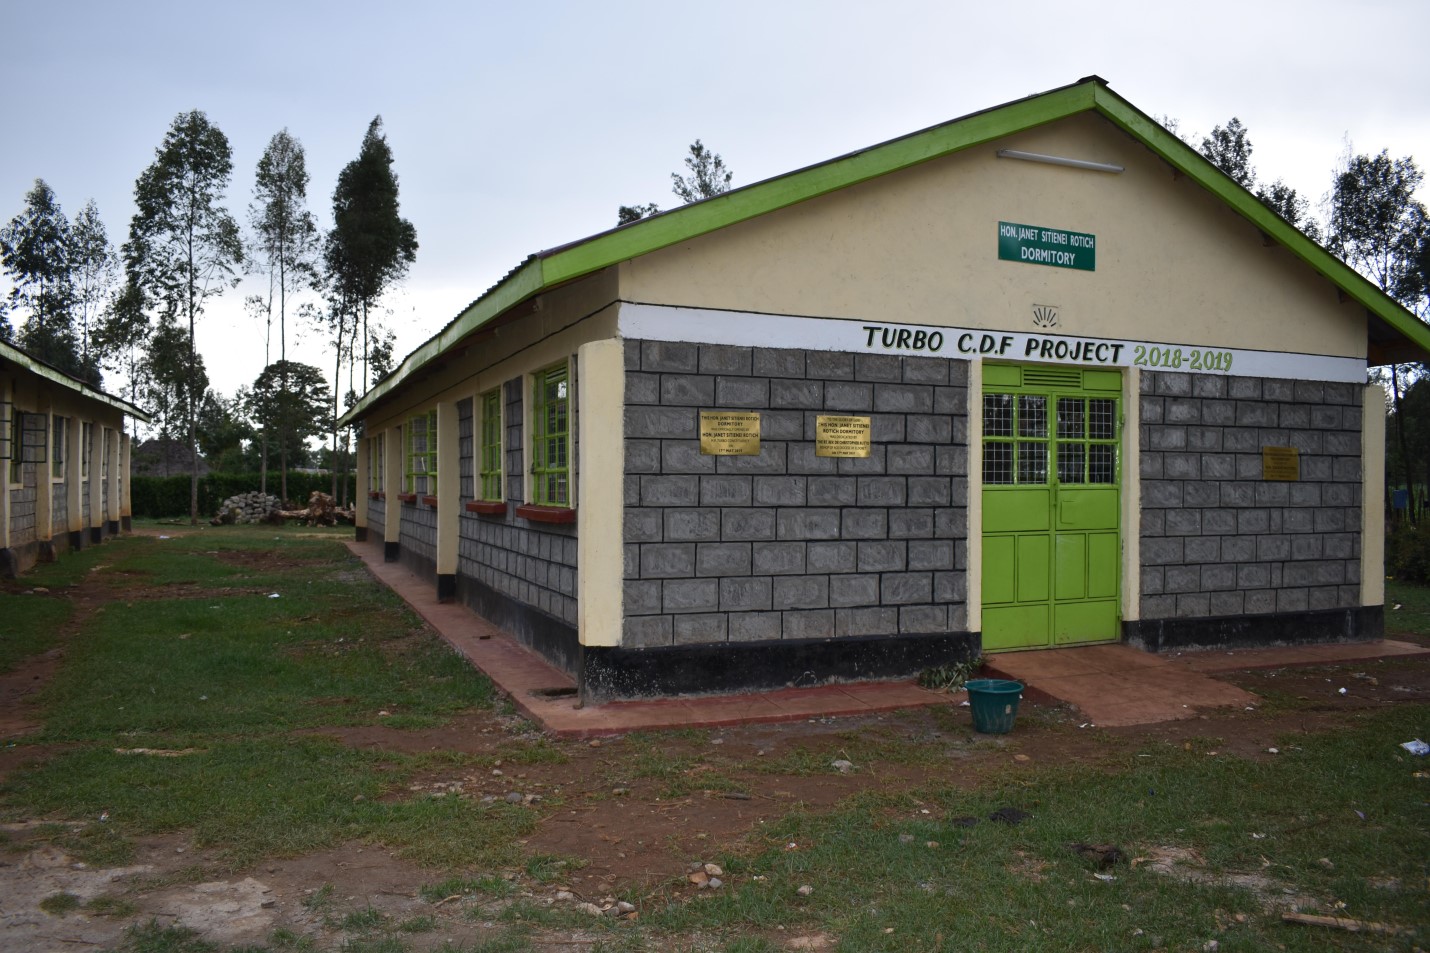 https://turbo.ngcdf.go.ke/wp-content/uploads/2021/08/KAPLELACH-HIGH-SCHOOL-DORMITORY-COMPLETED-WITH-A-CAPACITY-OF-80-STUDENTS.jpg